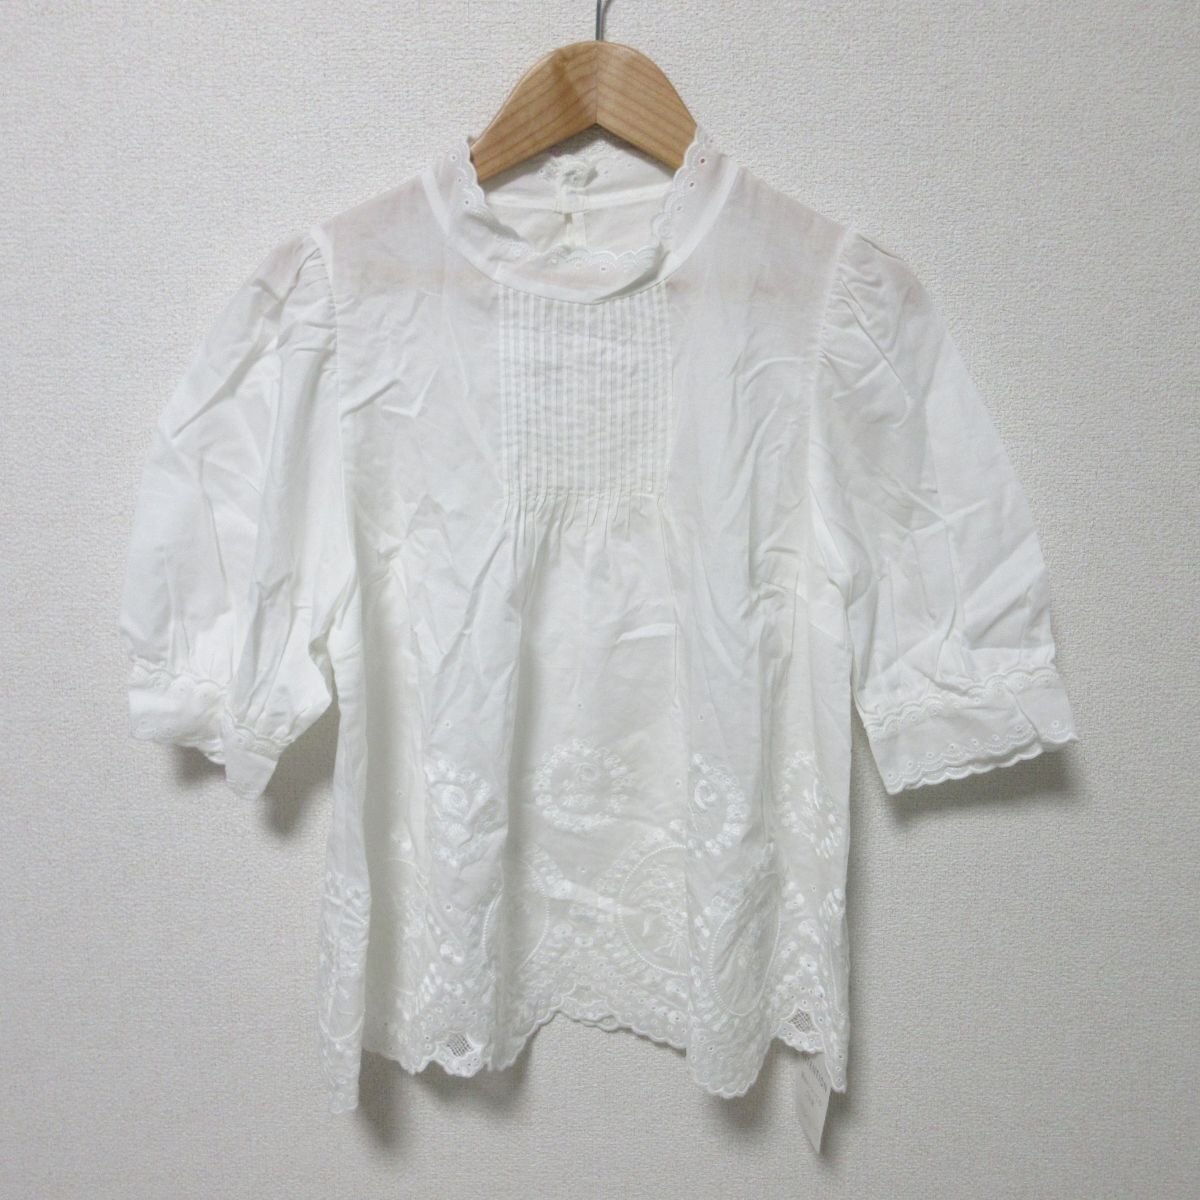  unused anatelier Anatelier embroidery ska LAP . minute sleeve stand-up collar pin tuck pull over blouse shirt 38 M white *